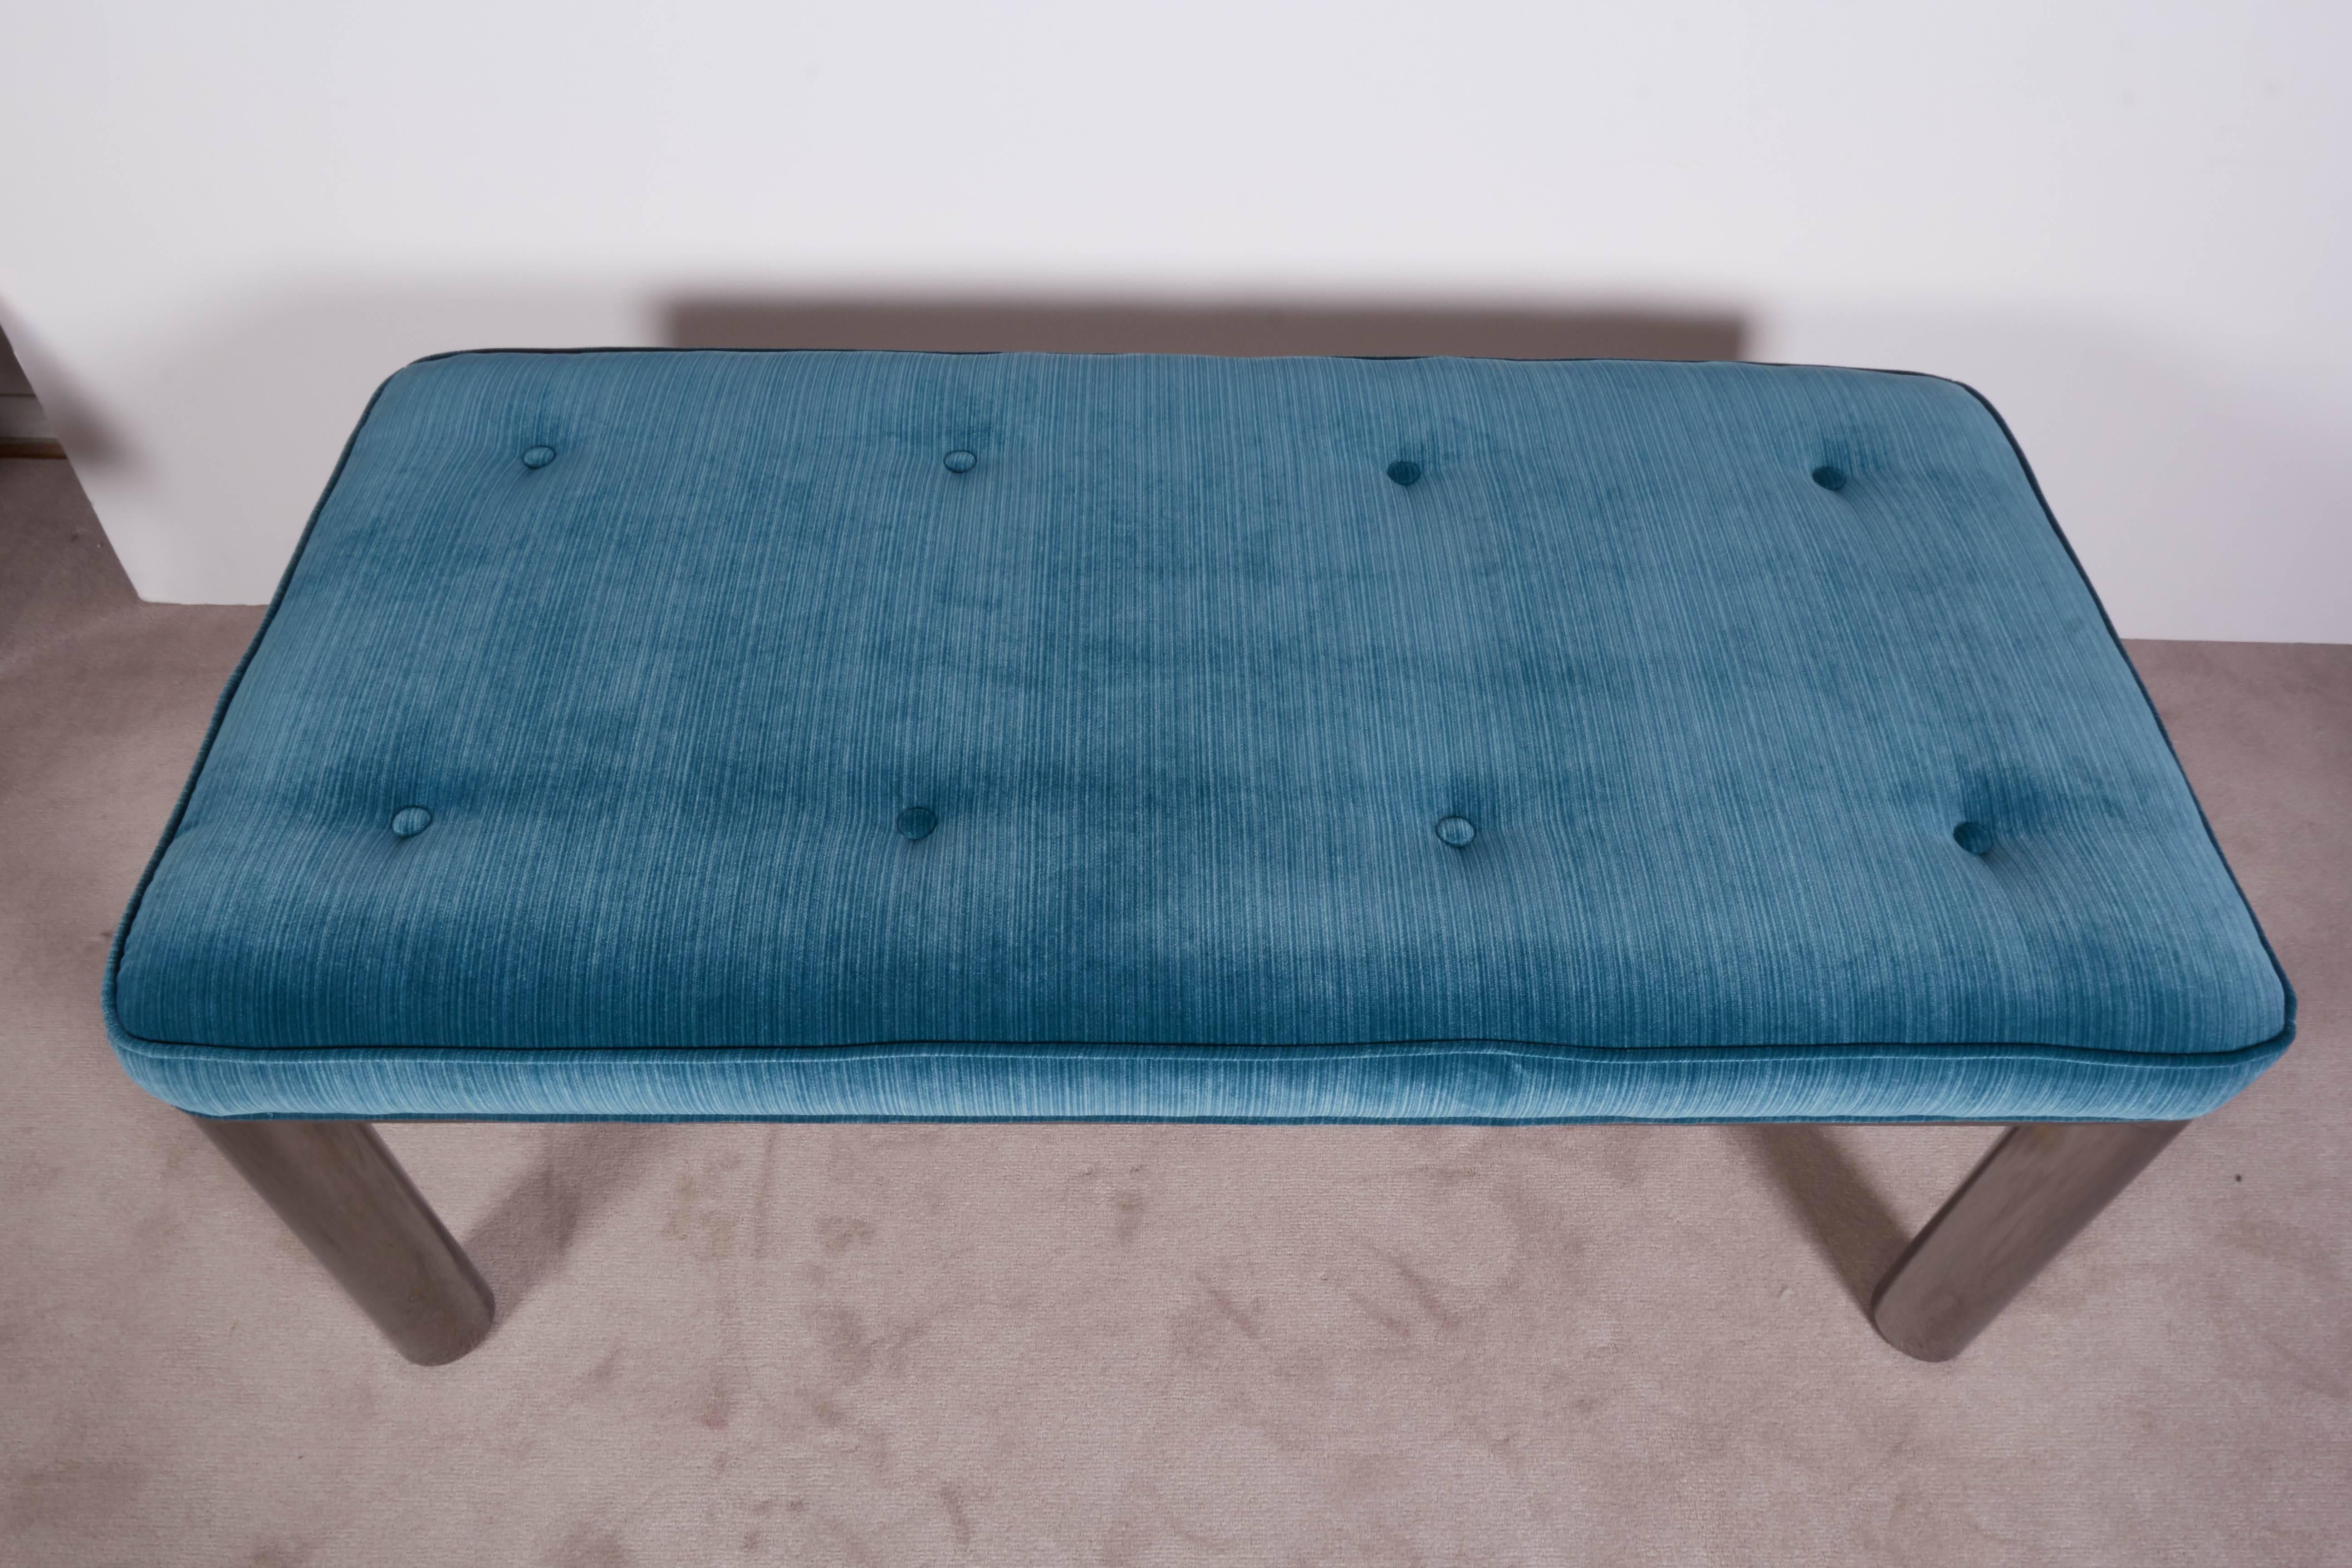 A Mid-Century Modern bench, produced circa 1970s, button tufted seat upholstered in peacock blue velvet, raised on chrome tubular base. Excellent vintage condition, newly reupholstered.

11058